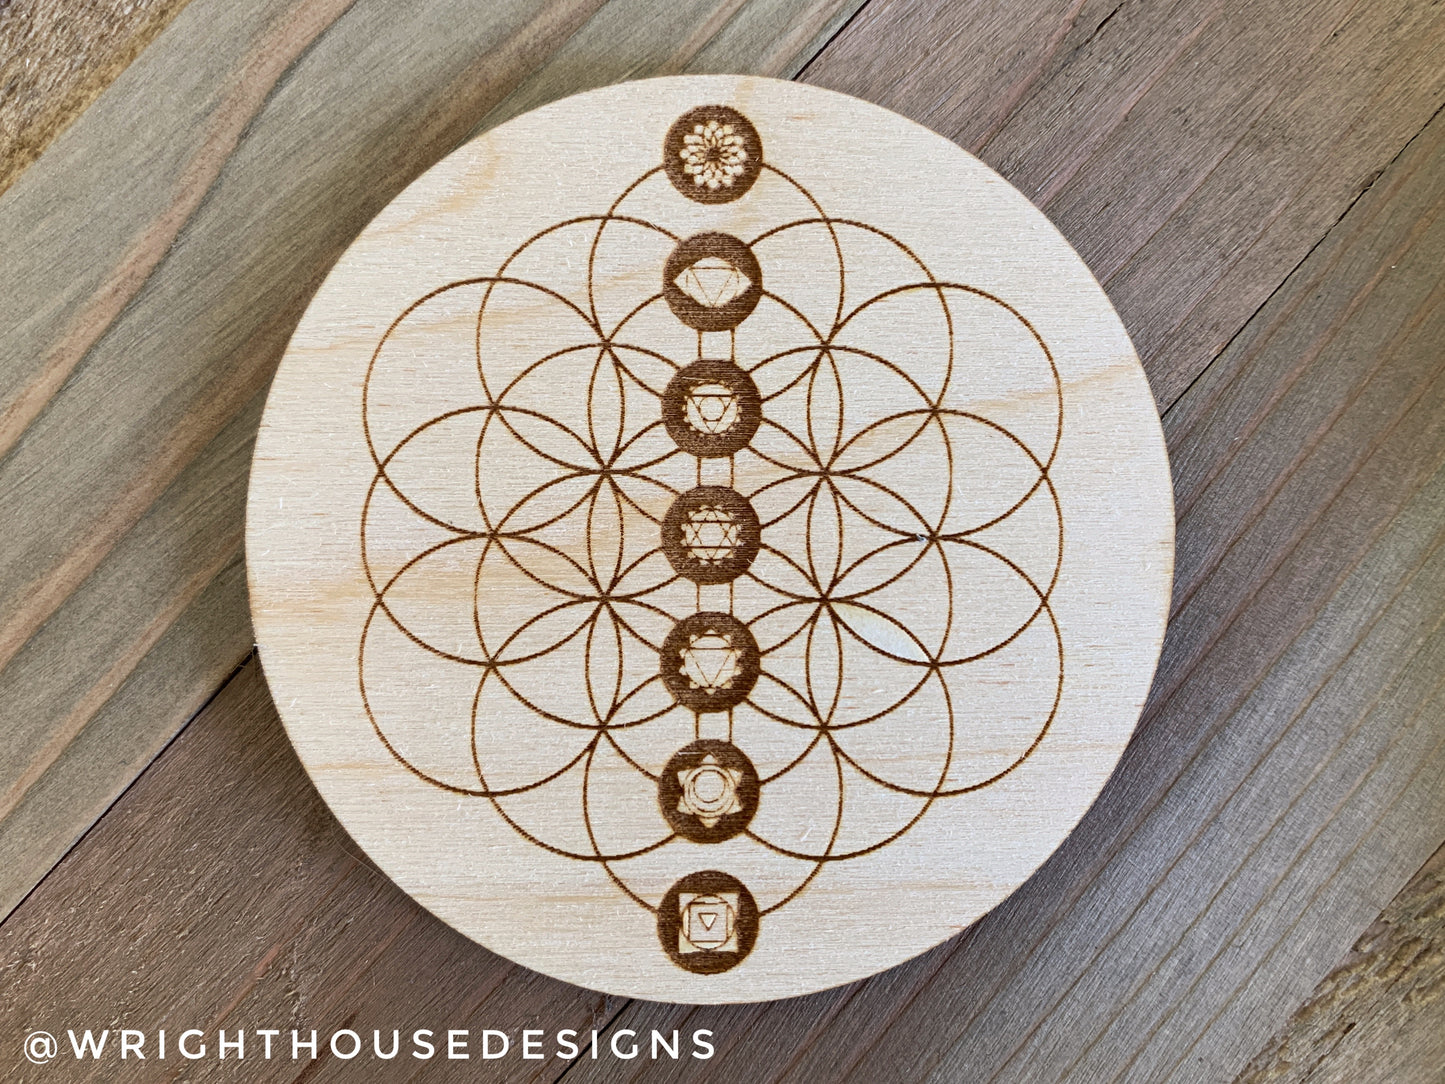 Chakra Flower of Life - Wooden Coasters and Grids